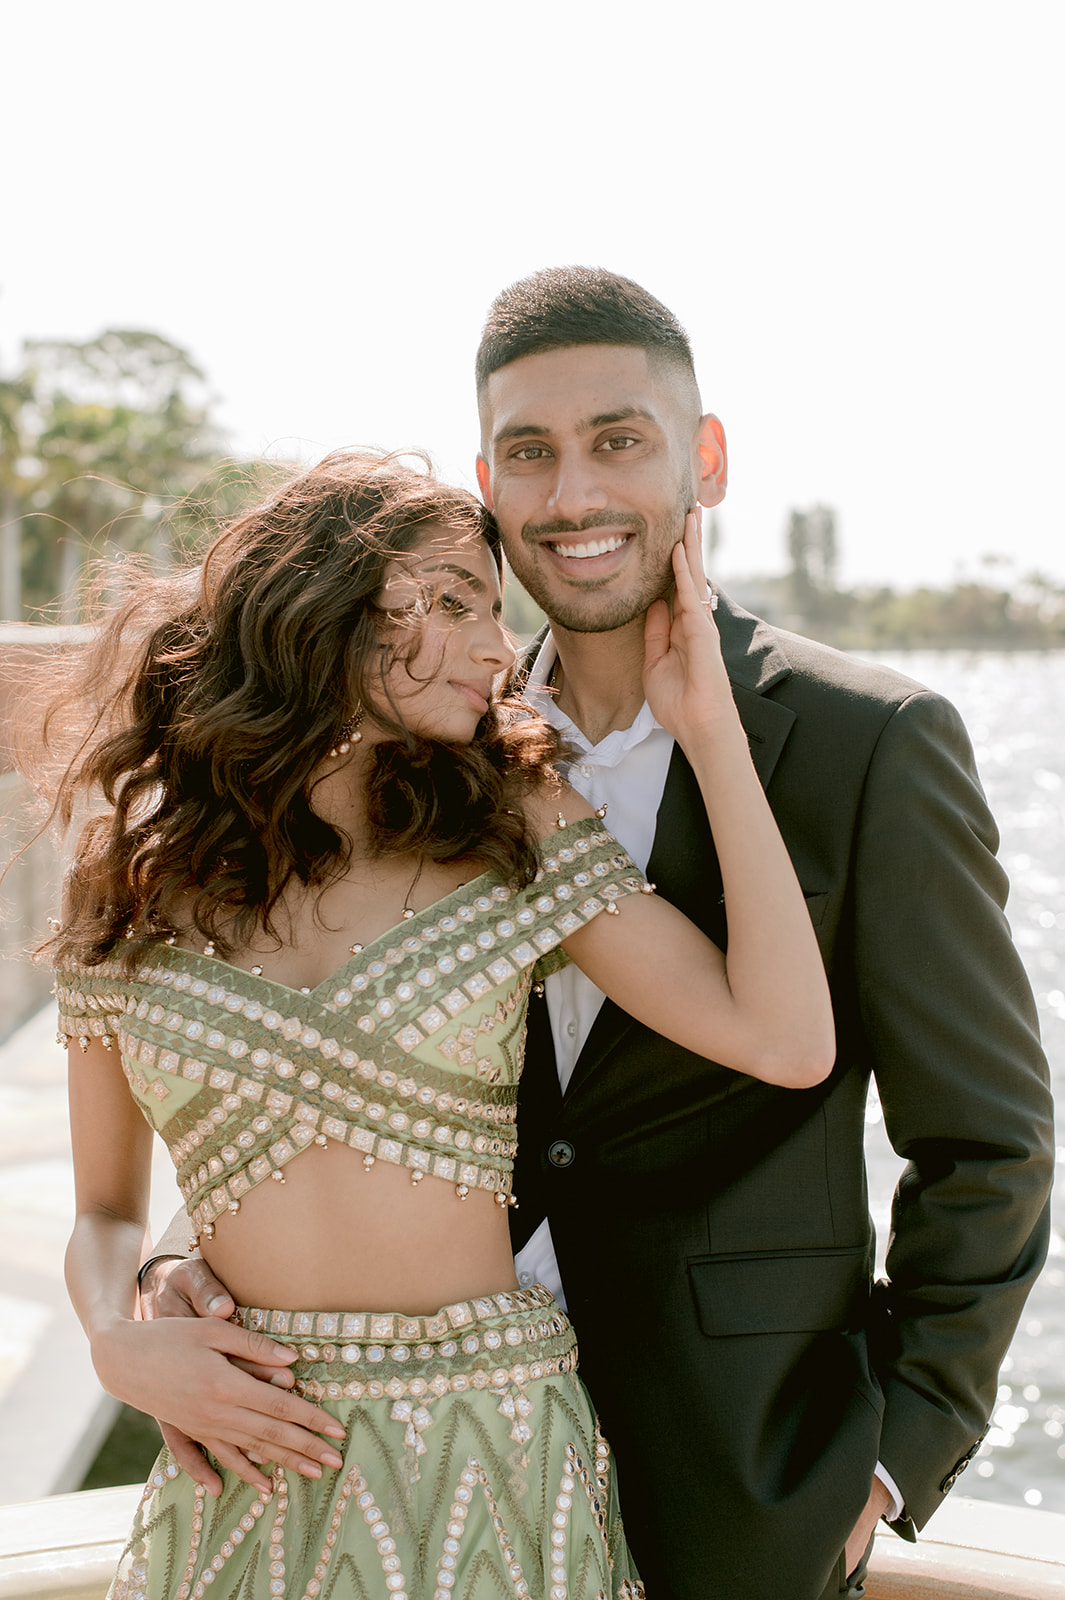 "Ringling Museum engagement shoot captures the beauty and essence of Indian culture and love"
